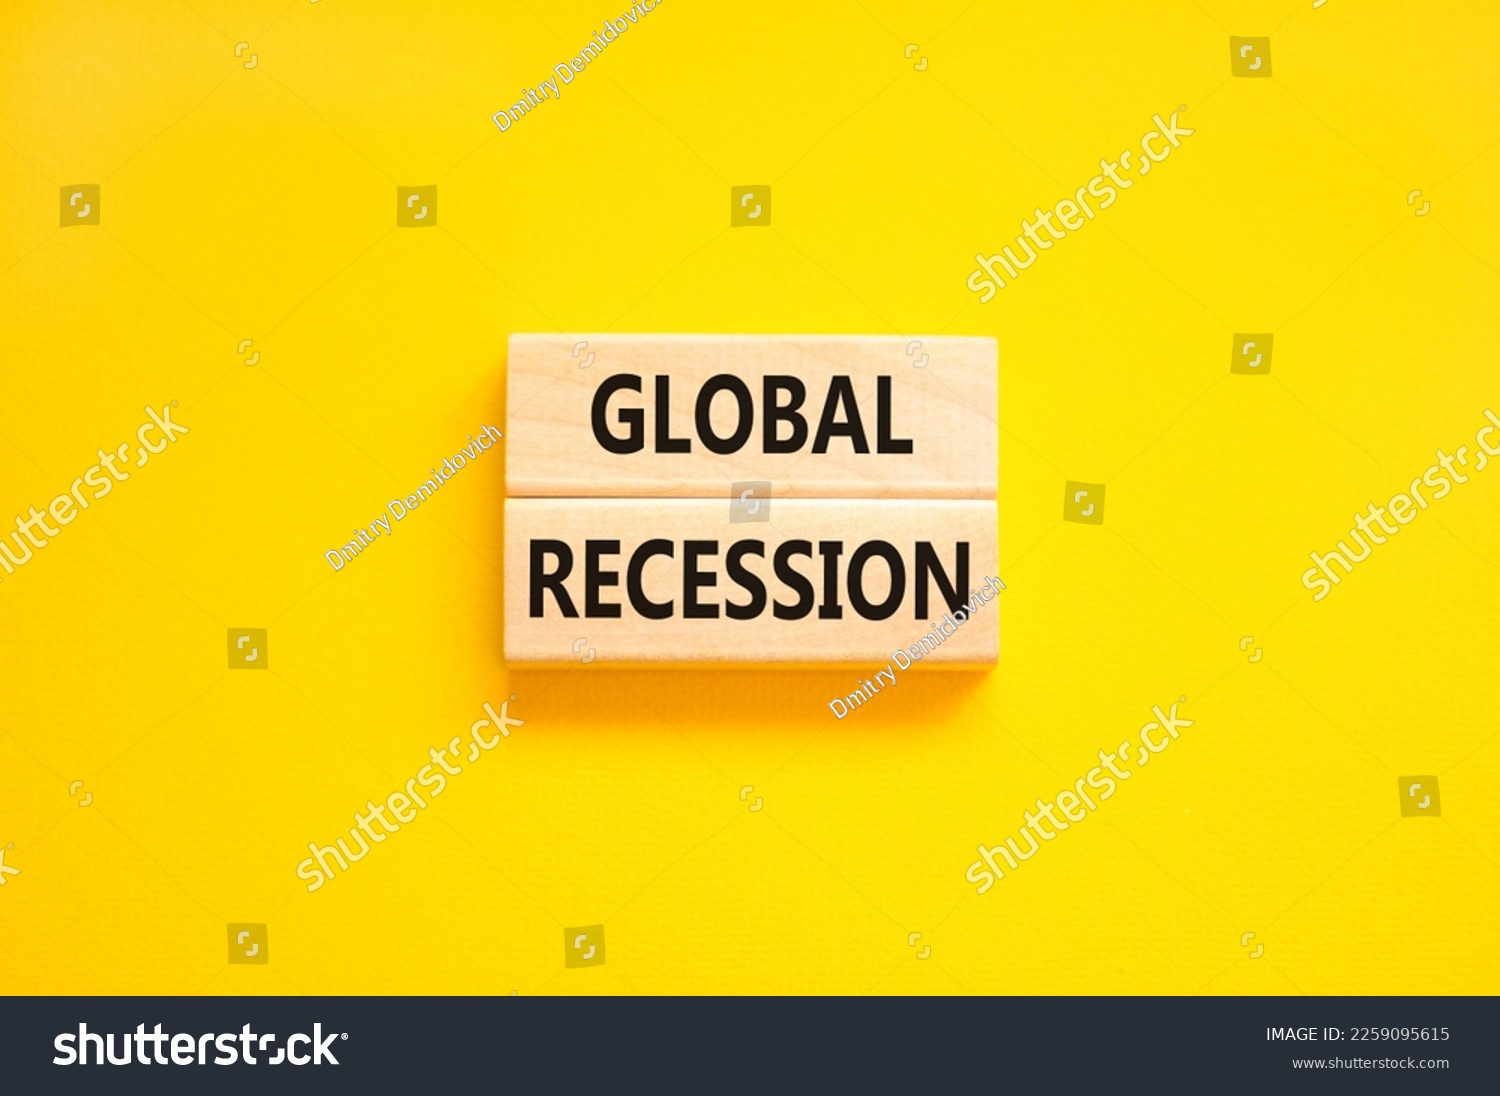 Global recession symbol. Concept words Global recession on wooden blocks. Beautiful yellow table yellow background. Business and global recession concept. Copy space. #2259095615